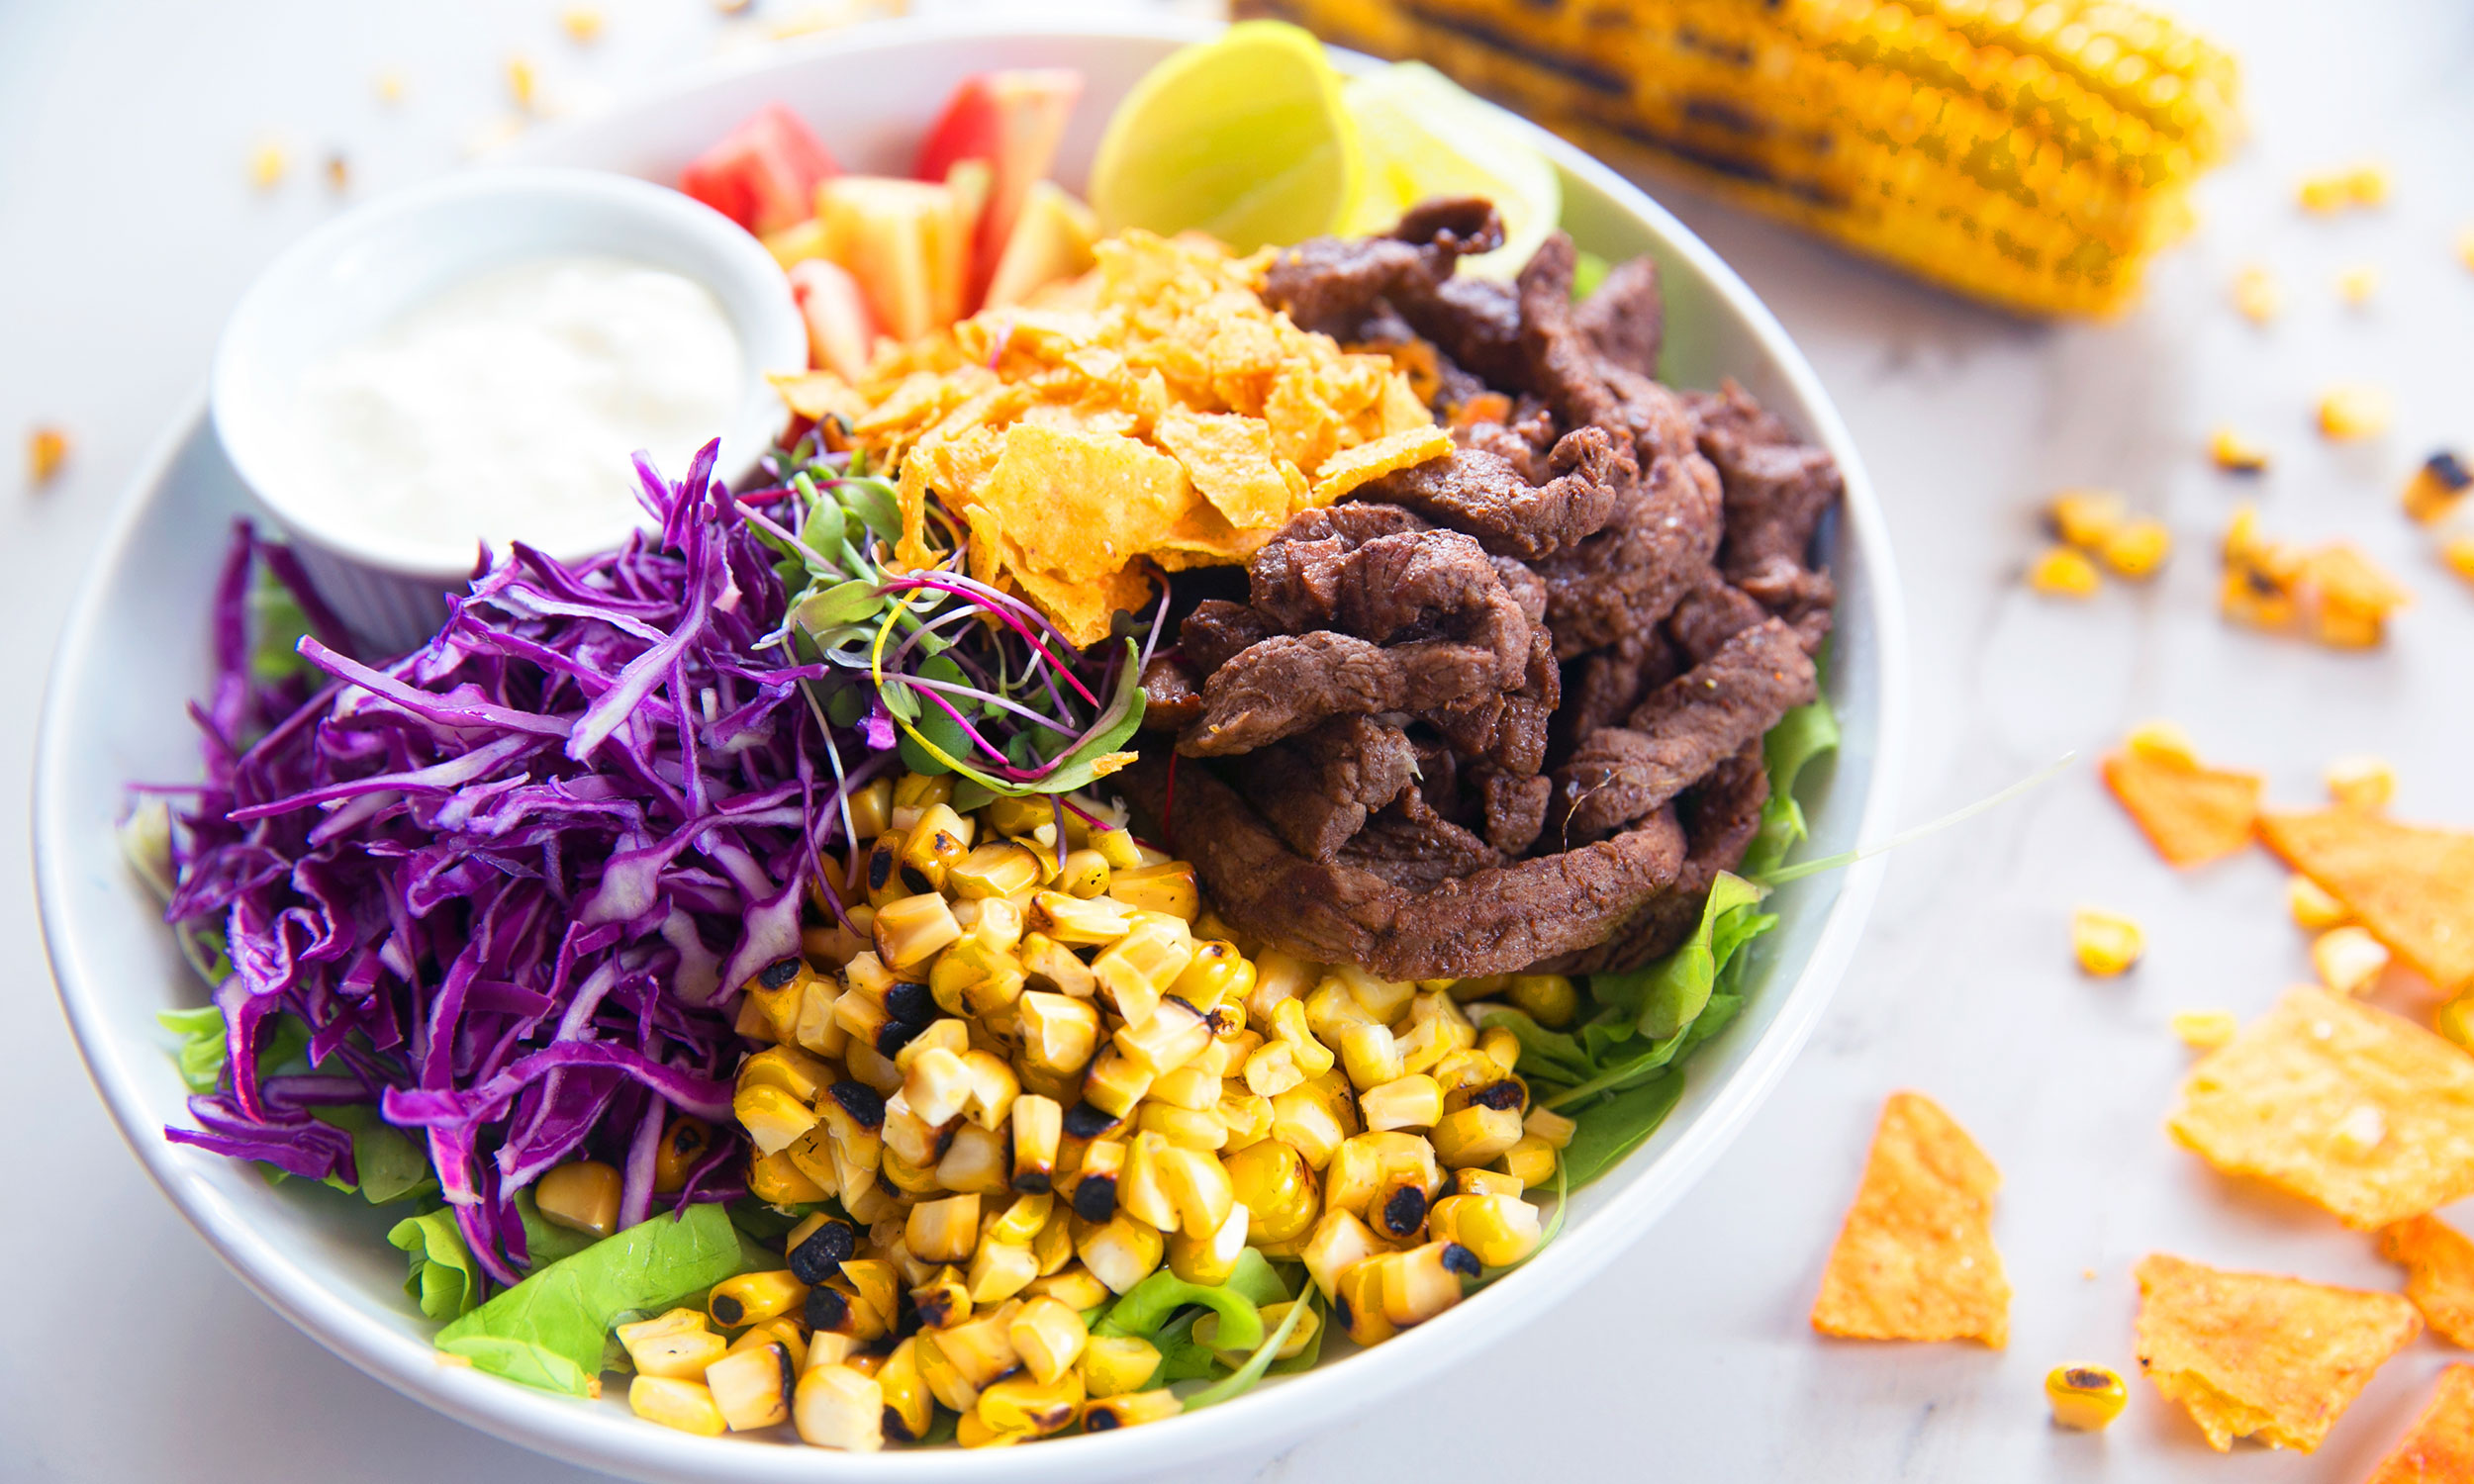 Make The Most Beautiful Salad With Charred Corn And Cocoa-Rubbed Steak